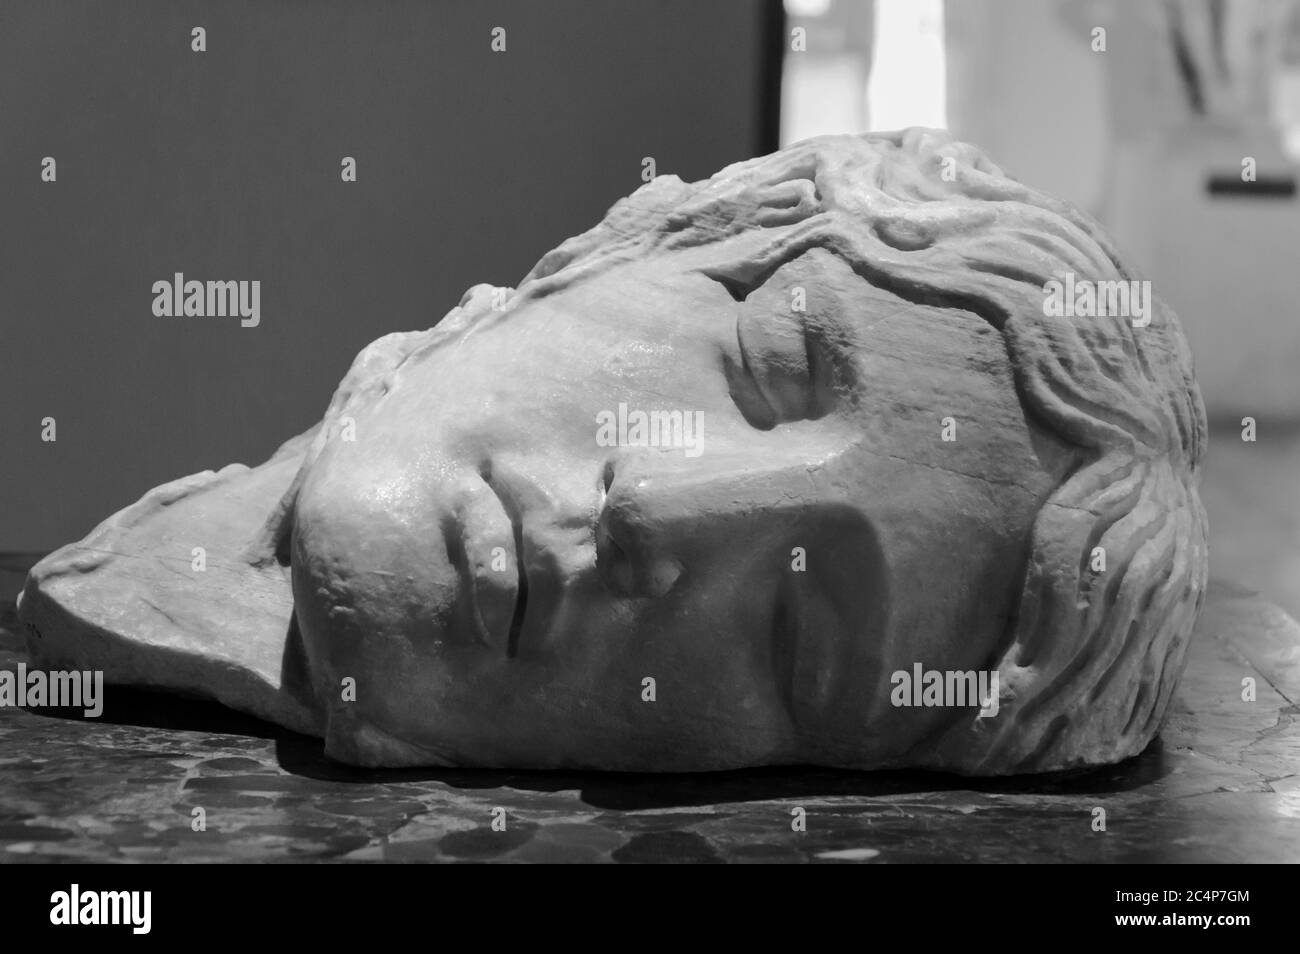 Black and white photo in close-up of face of ancient roman marble sculpture showing a young man sleeping Stock Photo